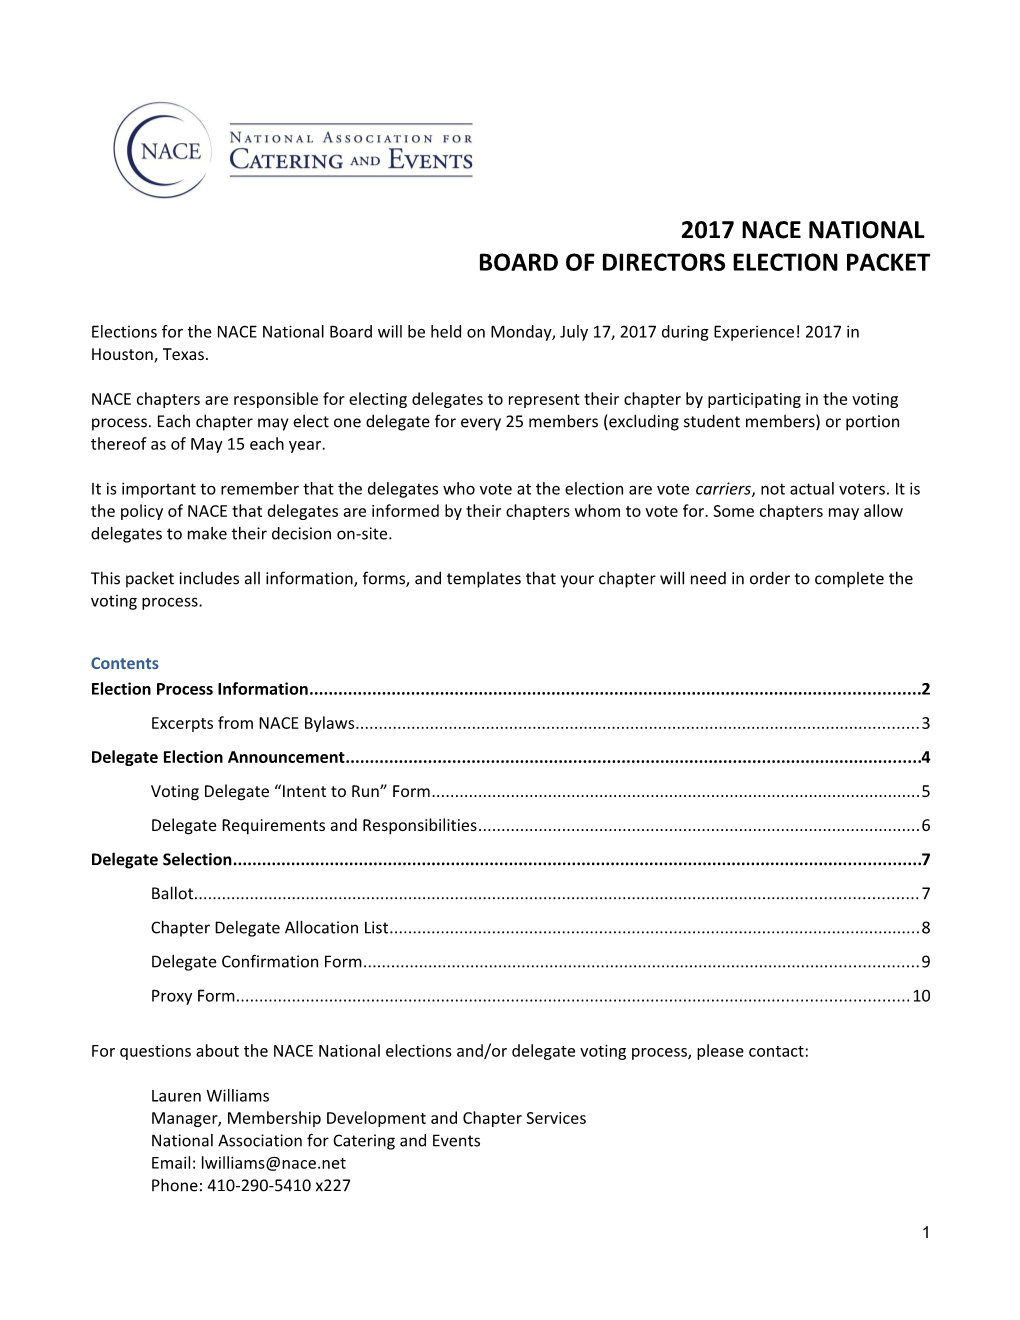 Board of Directors Election Packet